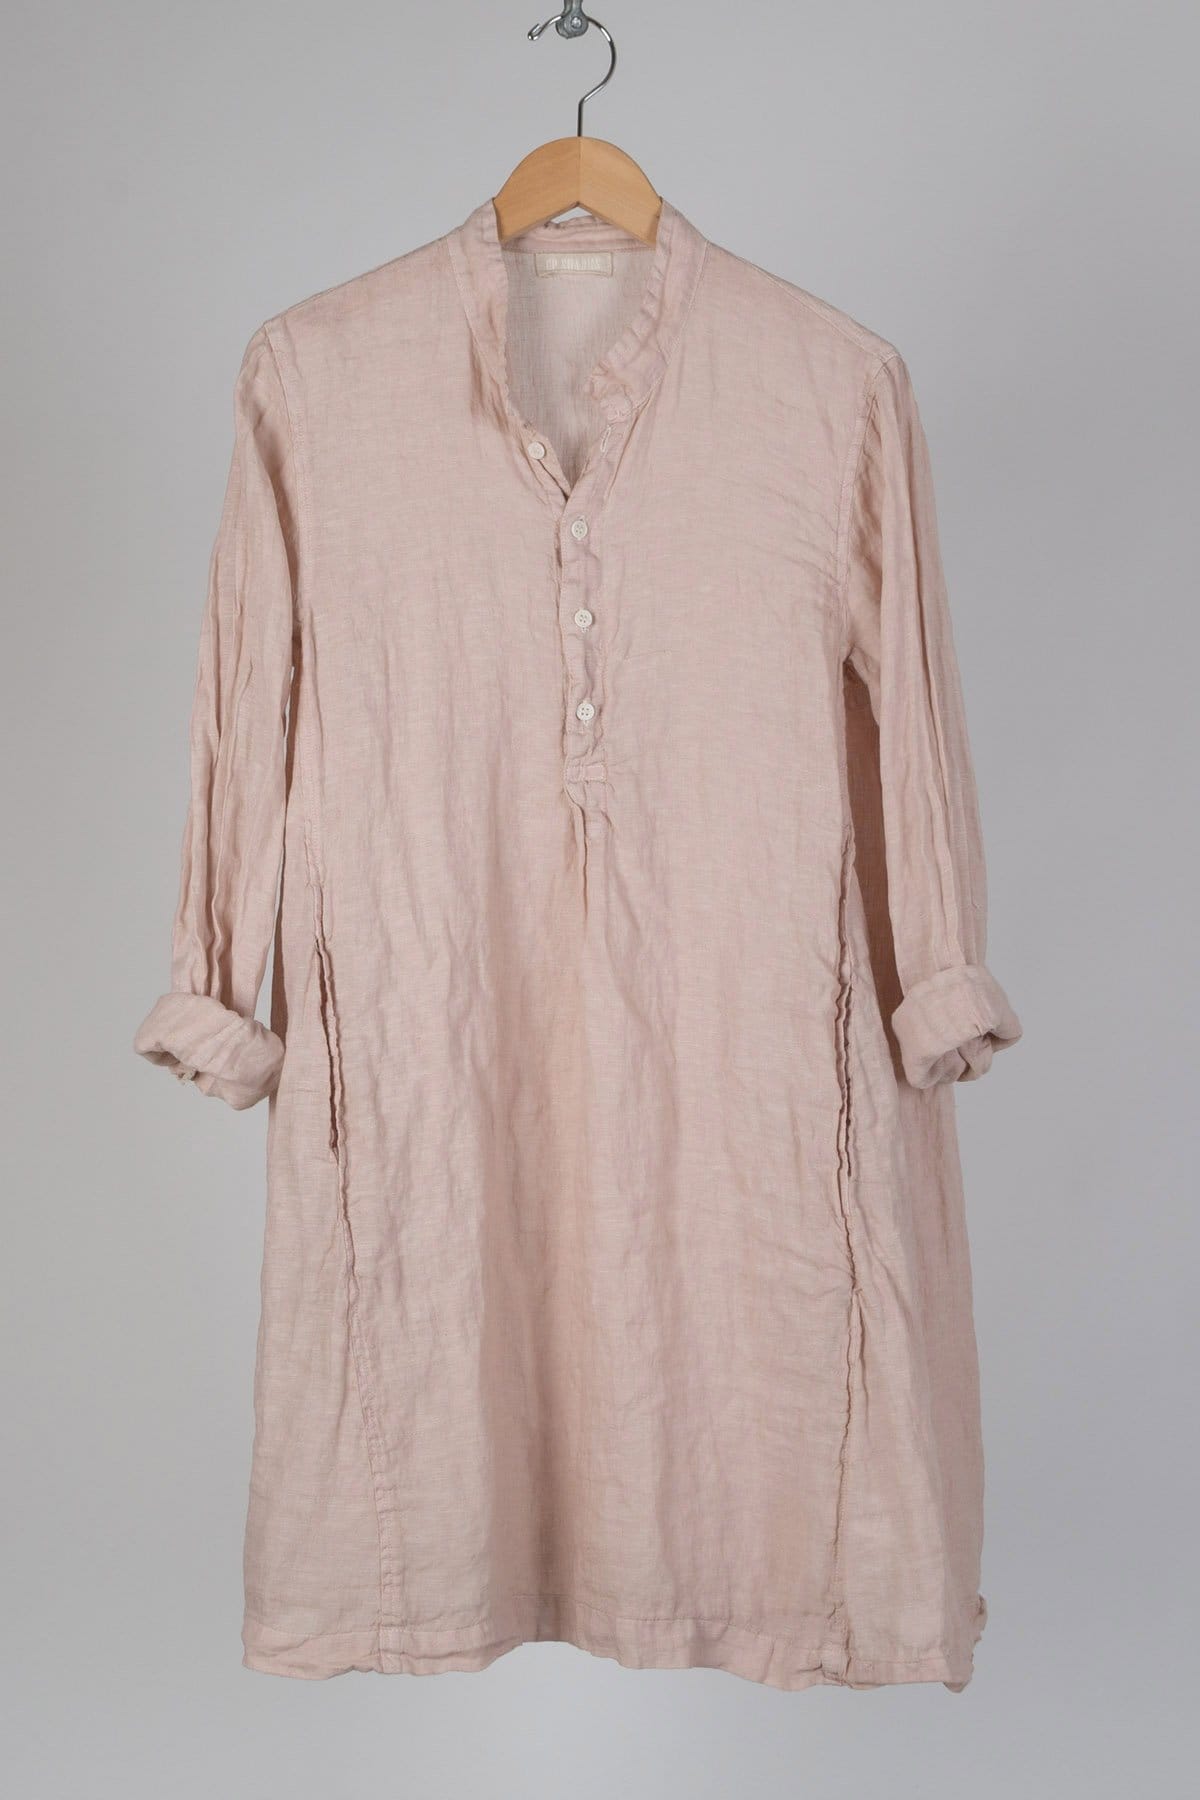 linen Long sleeve tunic with inset pockets and a short collar, wear as a tunic or a dress Godet panels at side seams